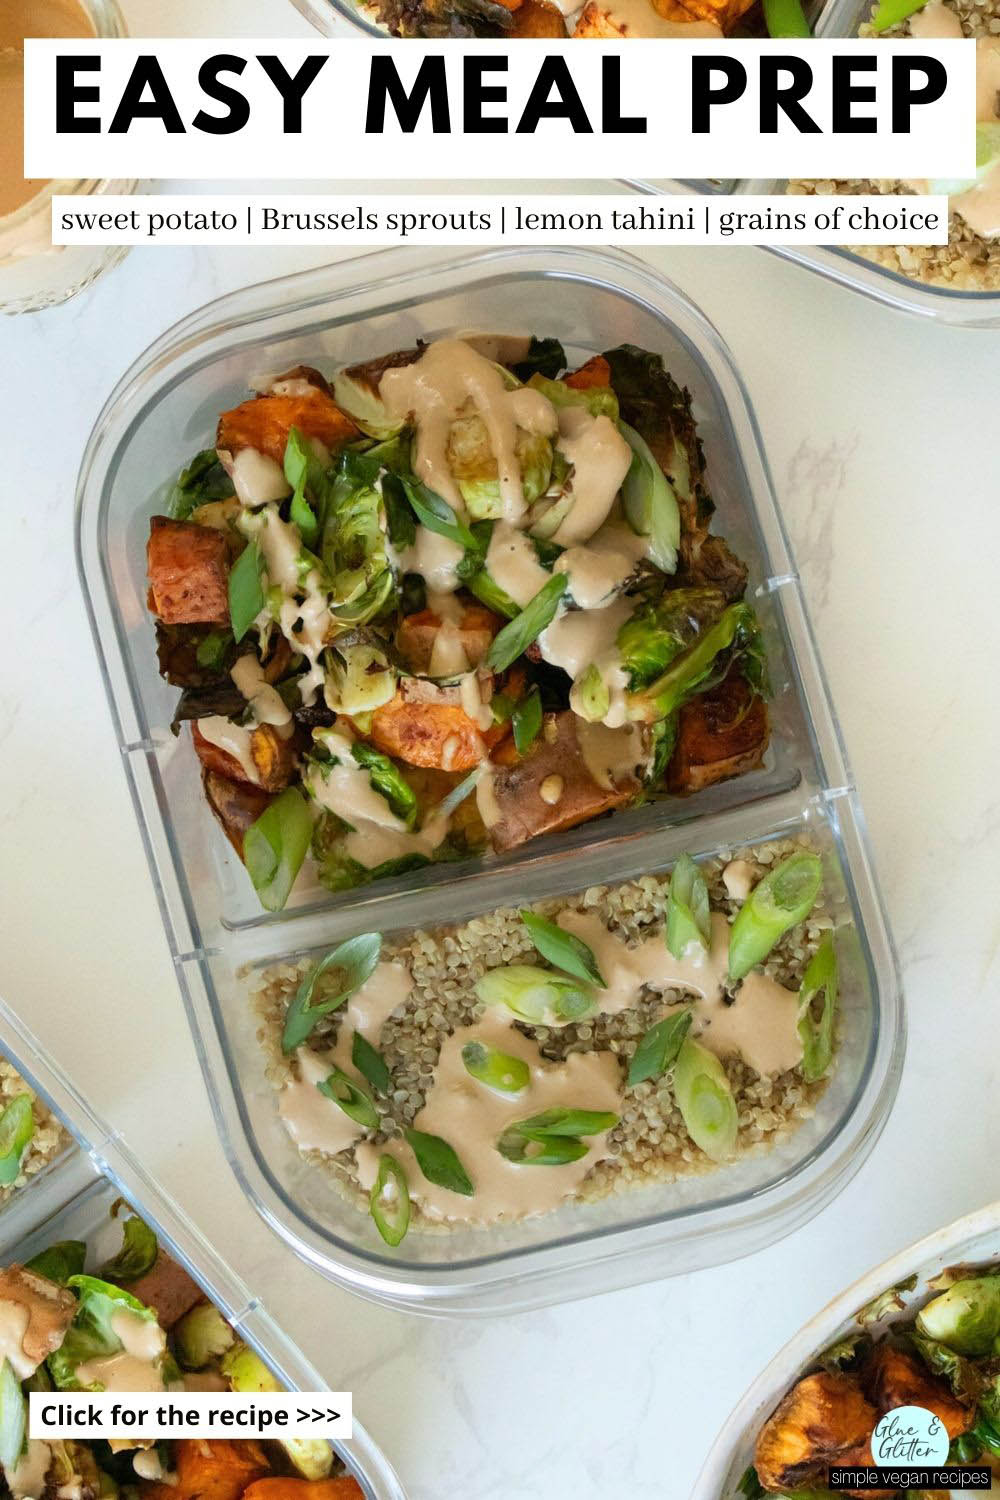 sweet potatoes and Brussels sprouts in a meal prep container with quinoa, sauce, and green onions, text overlay